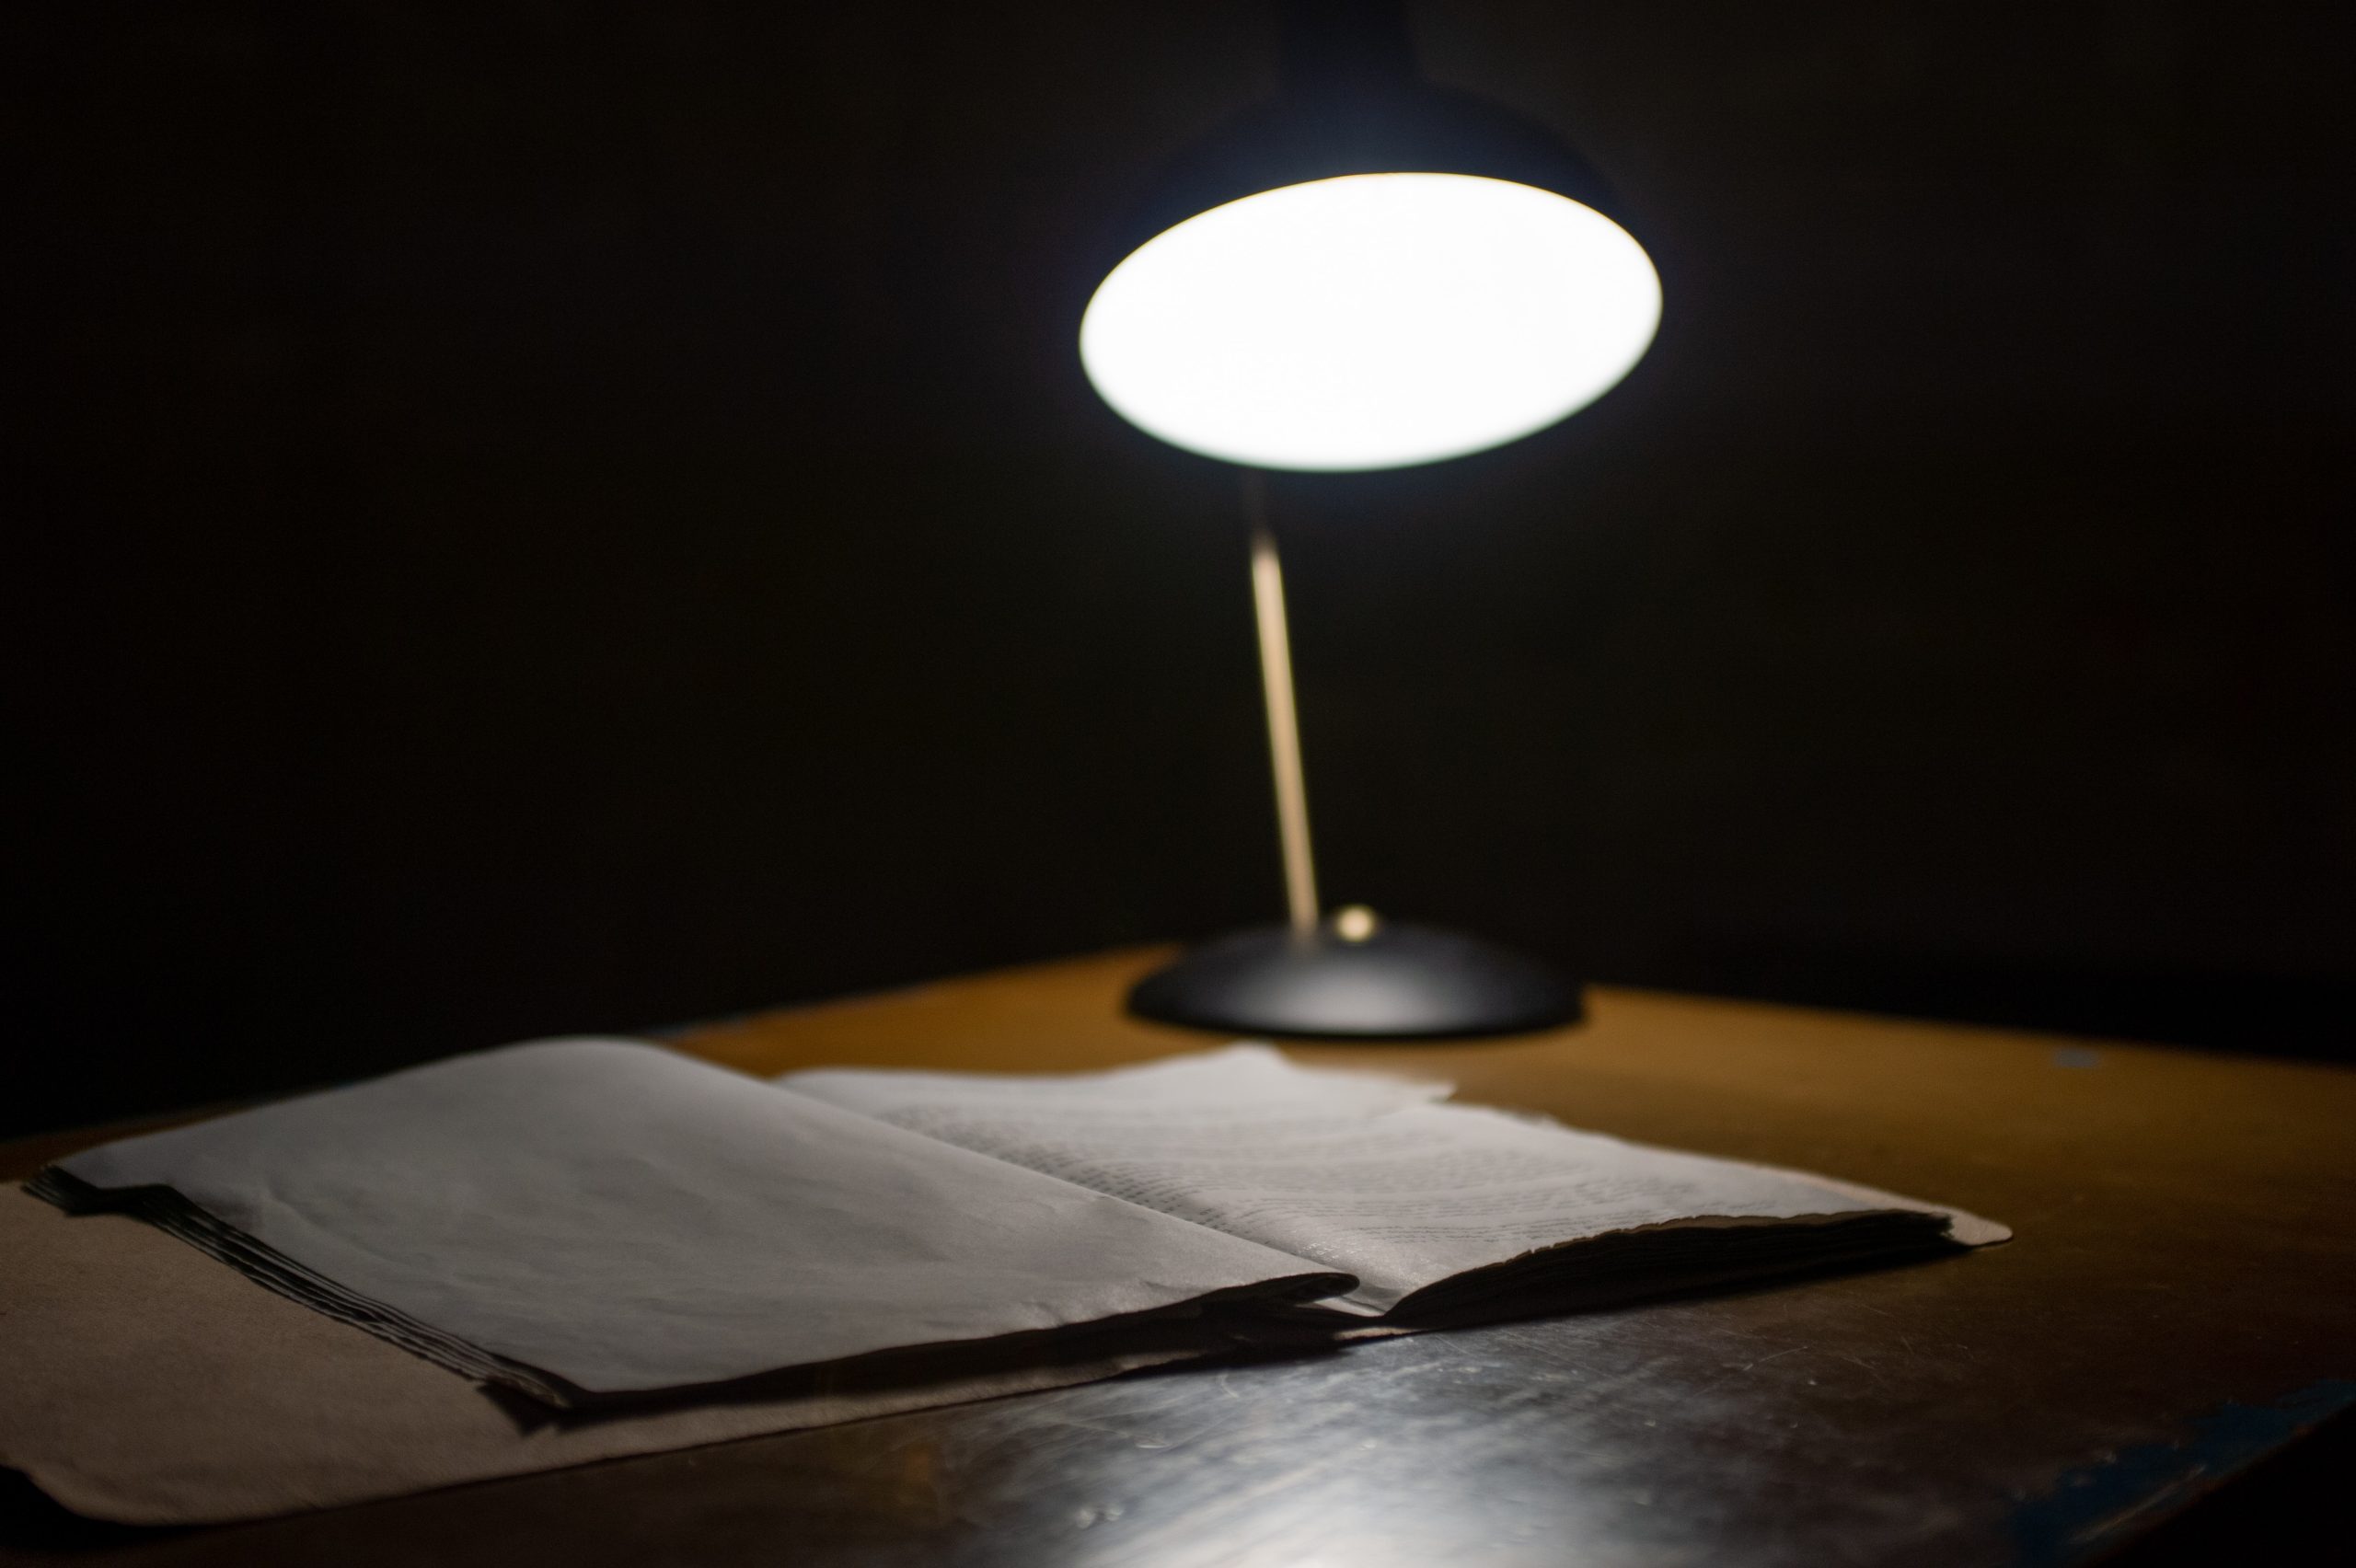 legal process papers under a lamp